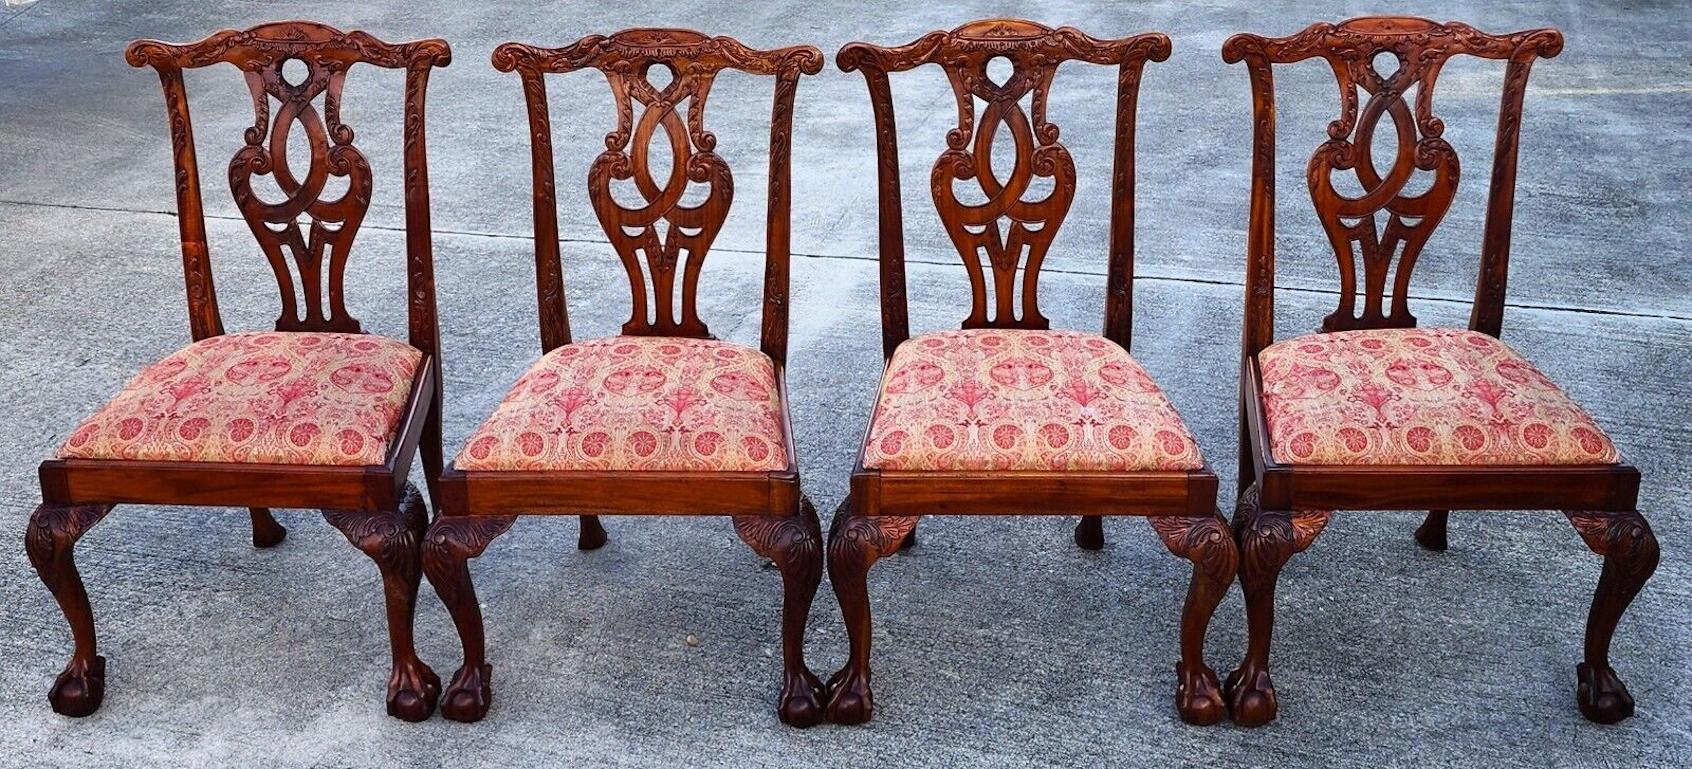 For FULL item description click on CONTINUE READING at the bottom of this page.

Offering One Of Our Recent Palm Beach Estate Fine Furniture Acquisitions Of A
Set of 4 Antique Chippendale Dining Chairs Solid Mahogany with Owl Back Design and Ball &